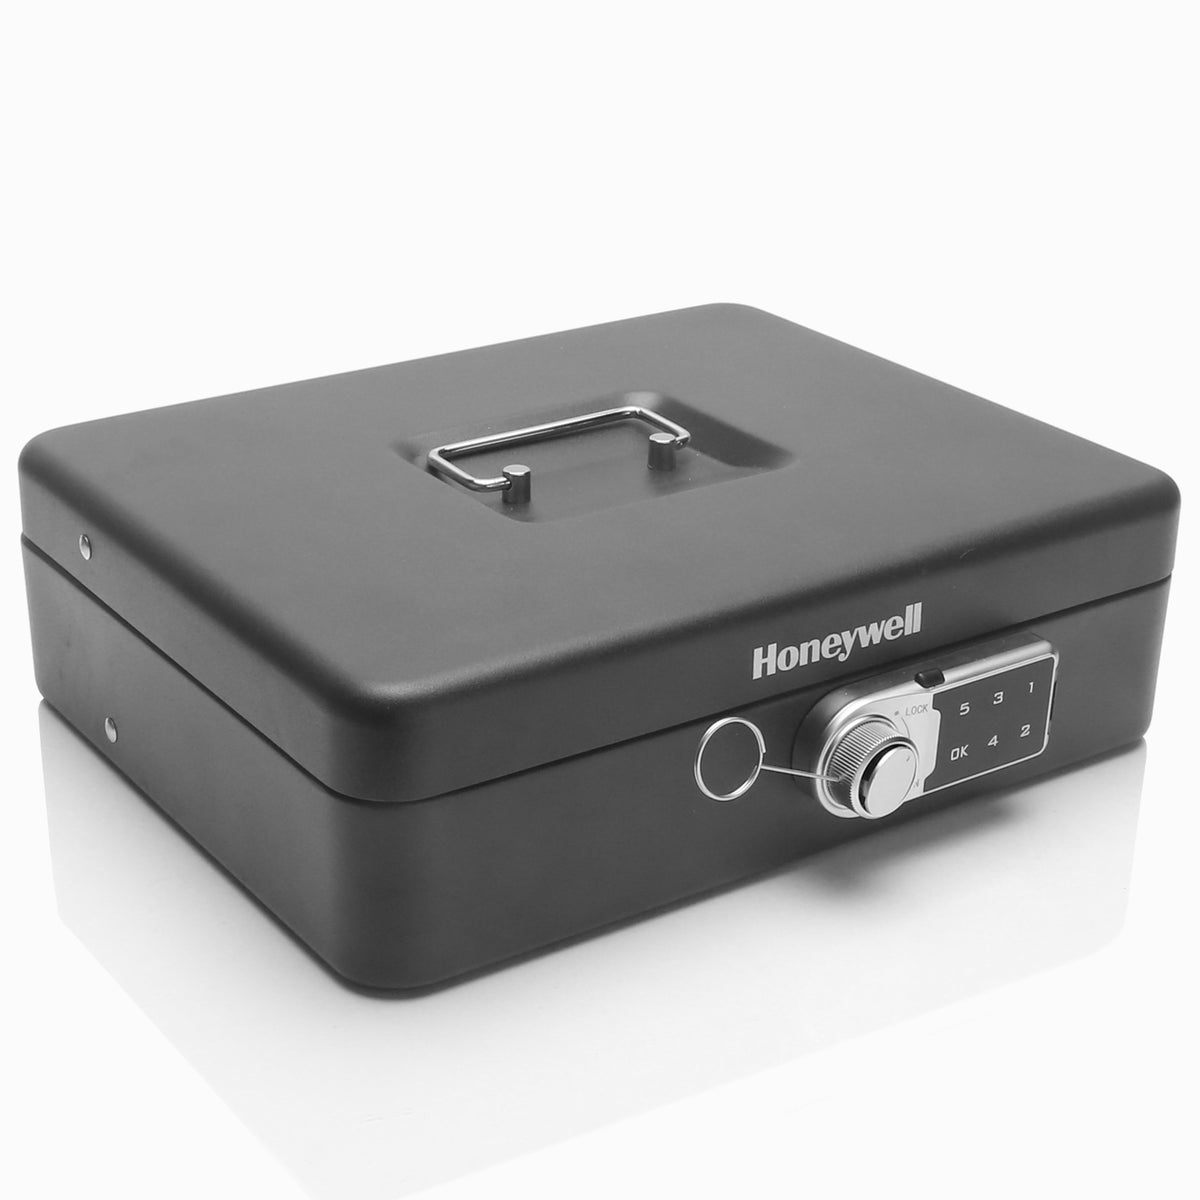 Honeywell 6213DG Digital Tiered Cash Box with Touchpad Lock Closed 2